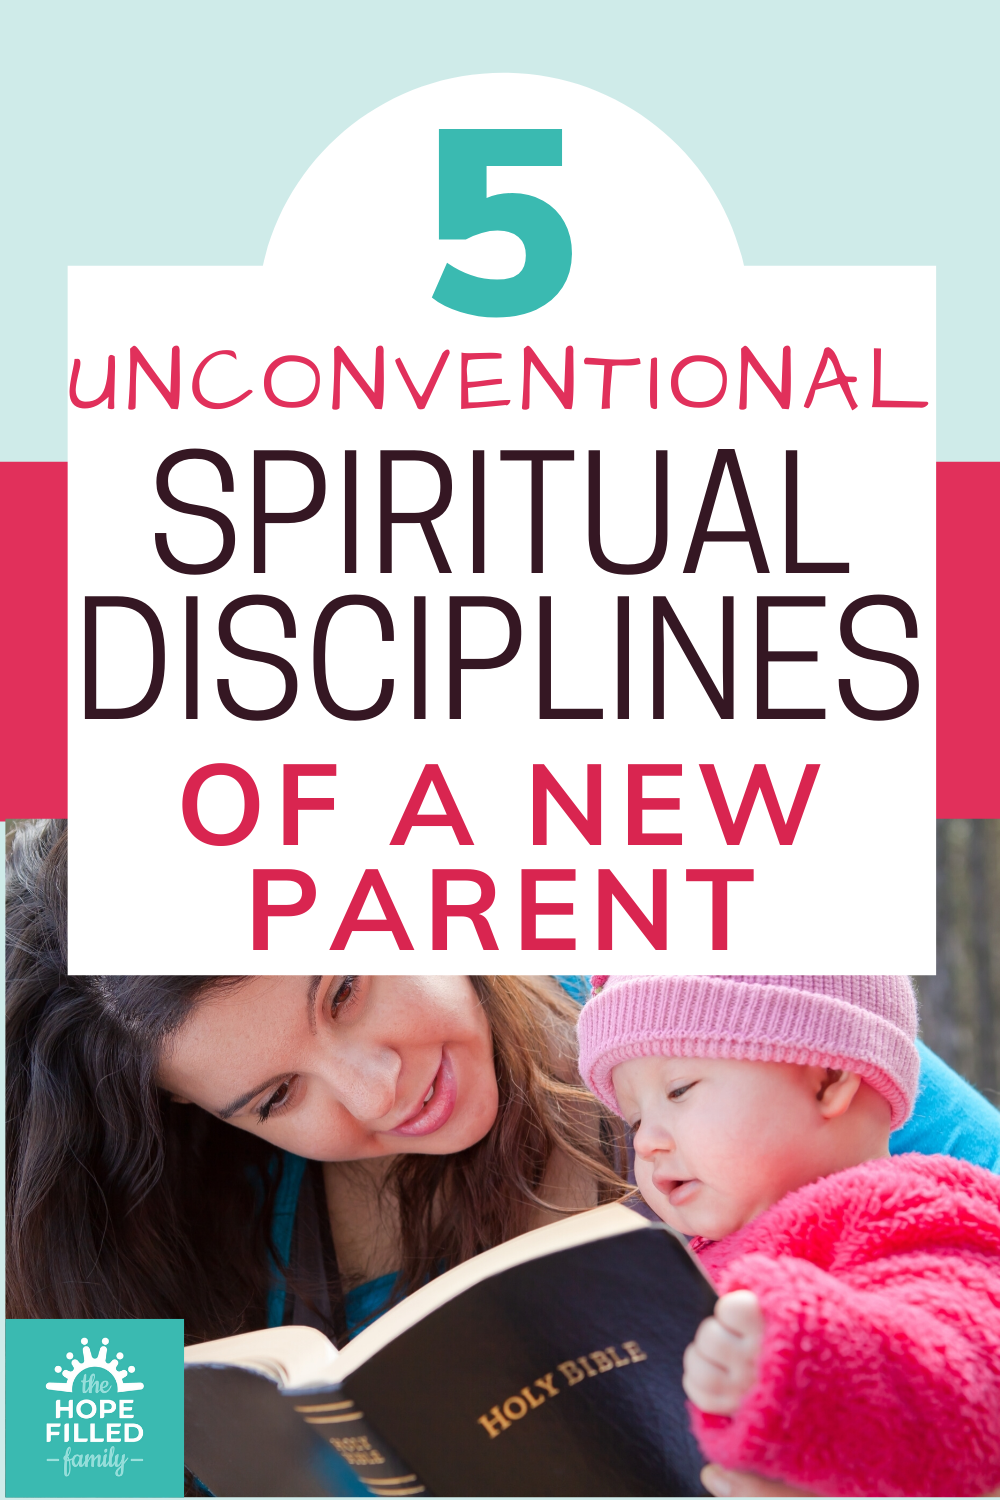 How do I keep my faith alive with small children? How do I commit to spiritual disciplines when I'm a new parent?